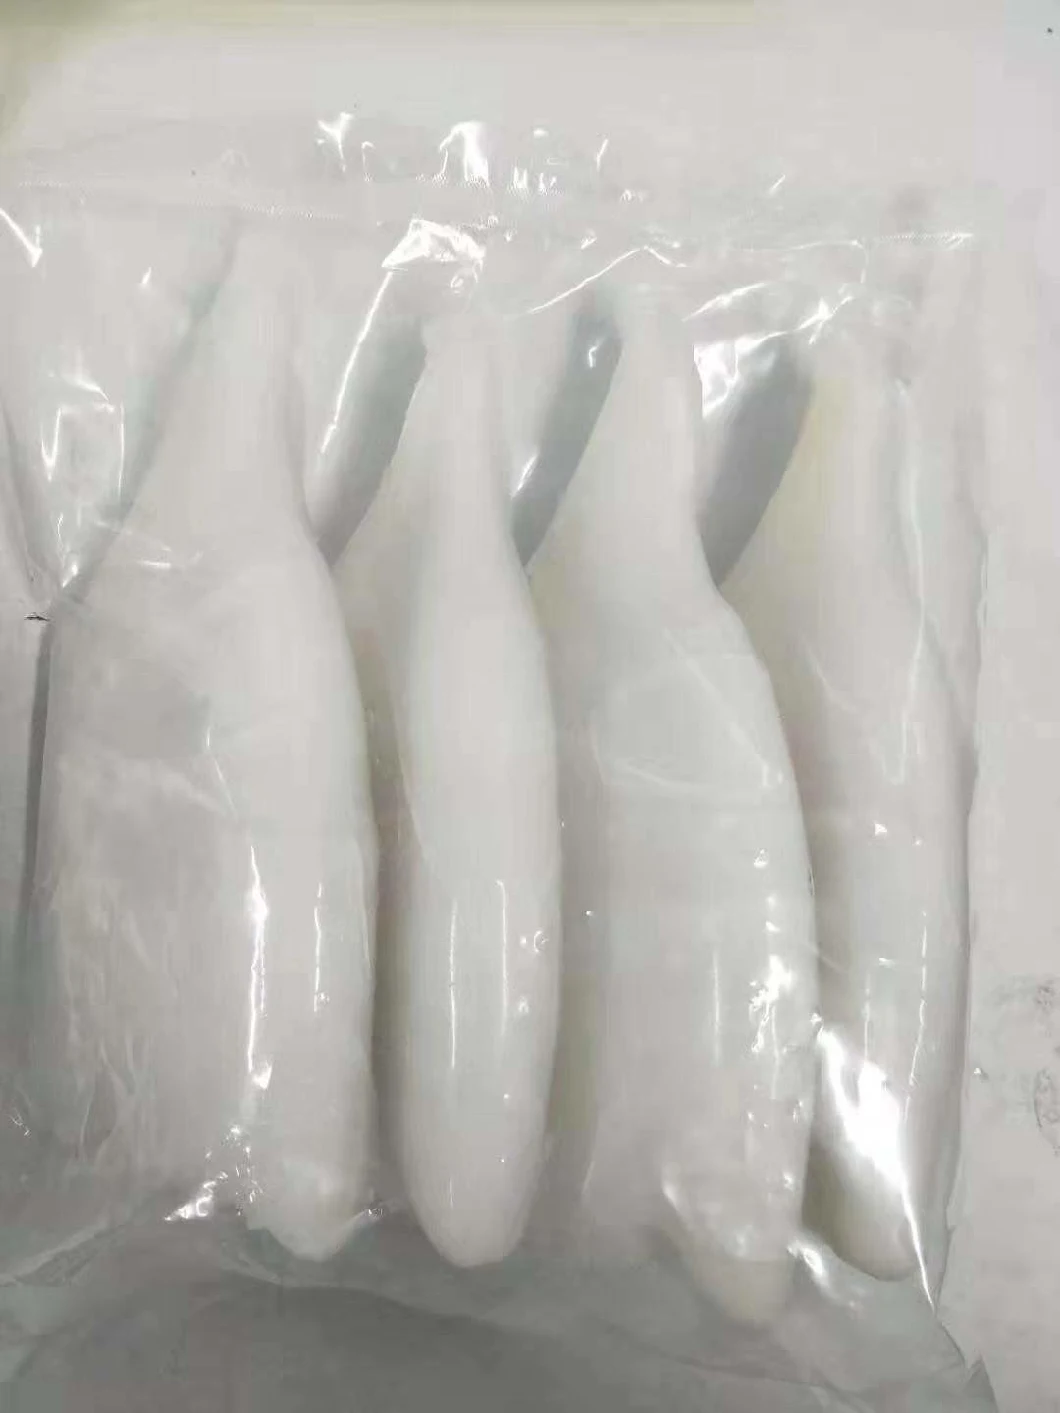 Frozen Seafood Giant Squid Tube with Cheap Price